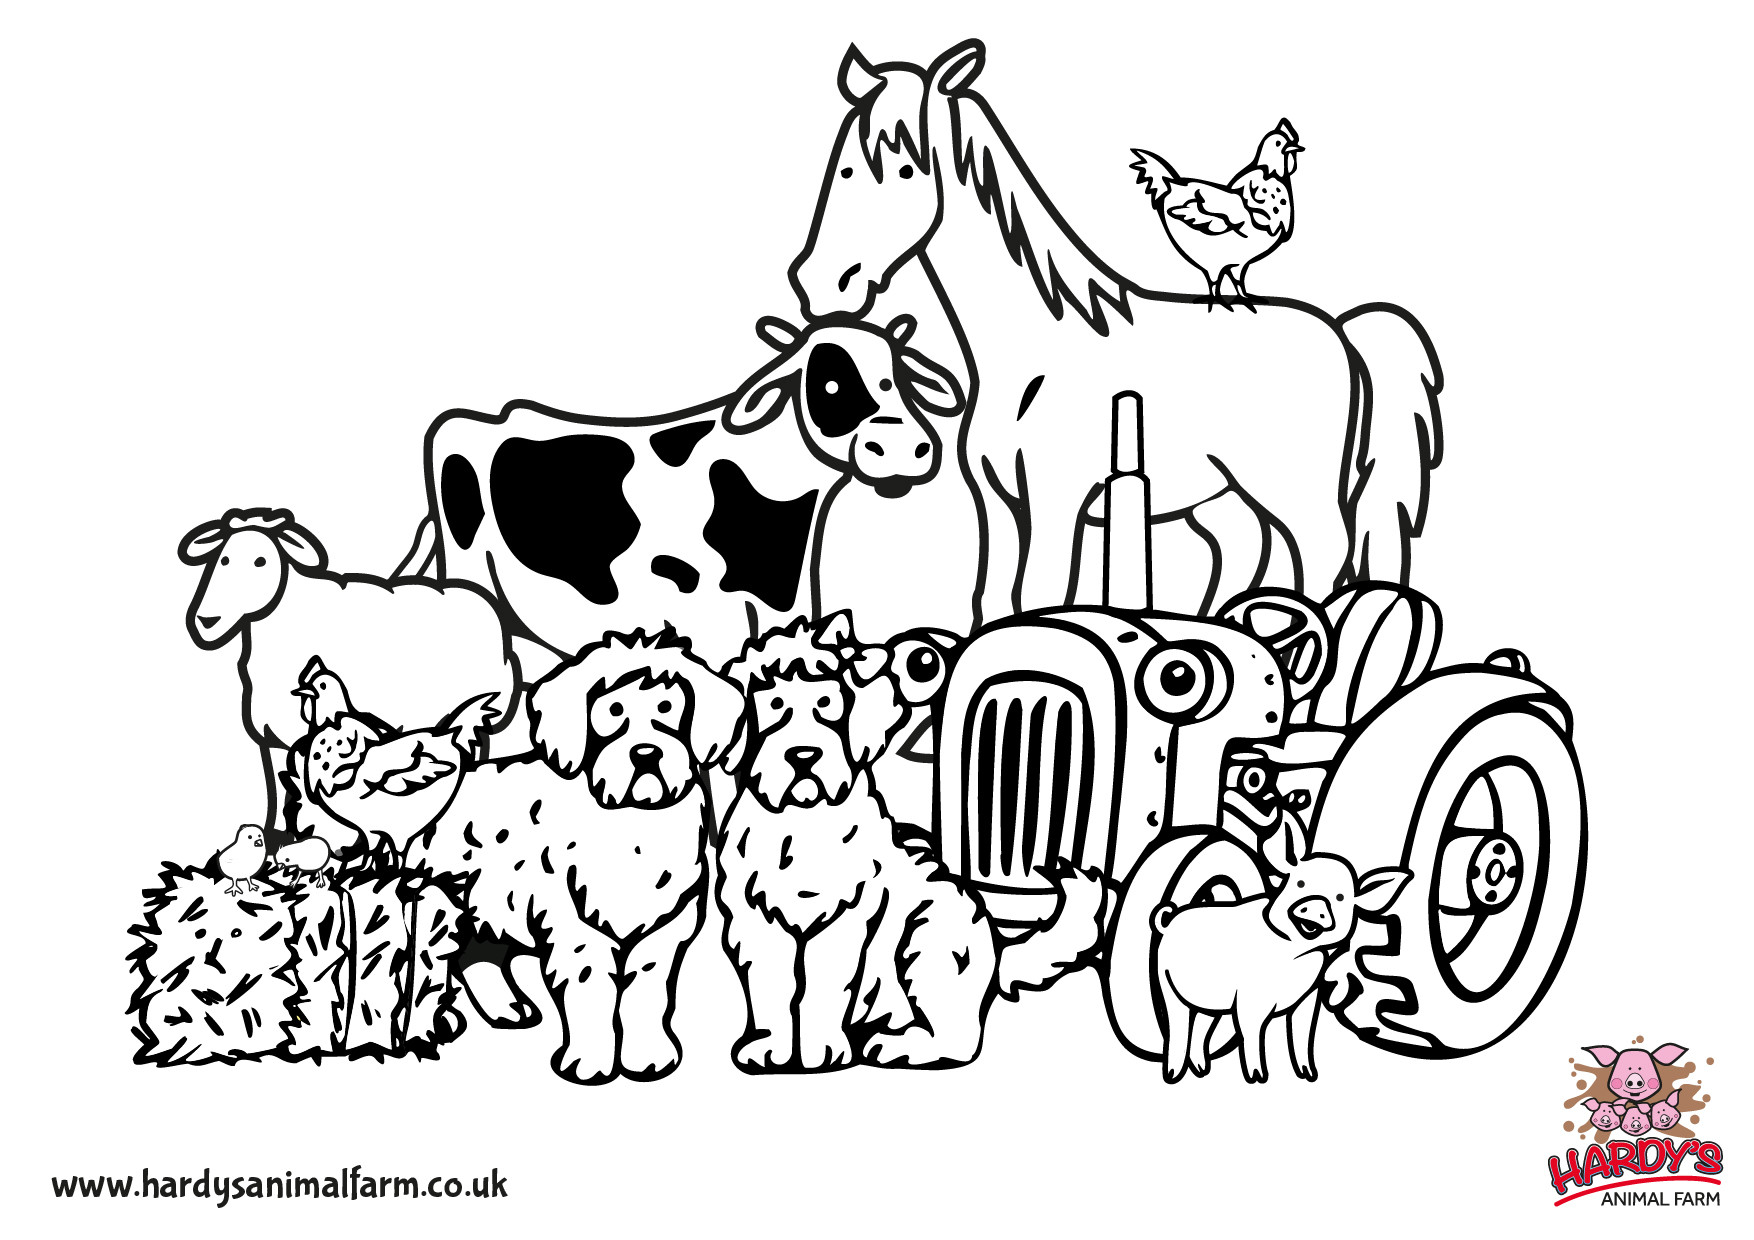 Printable Farm Coloring Pages
 Colouring Pages Hardys Animal Farm